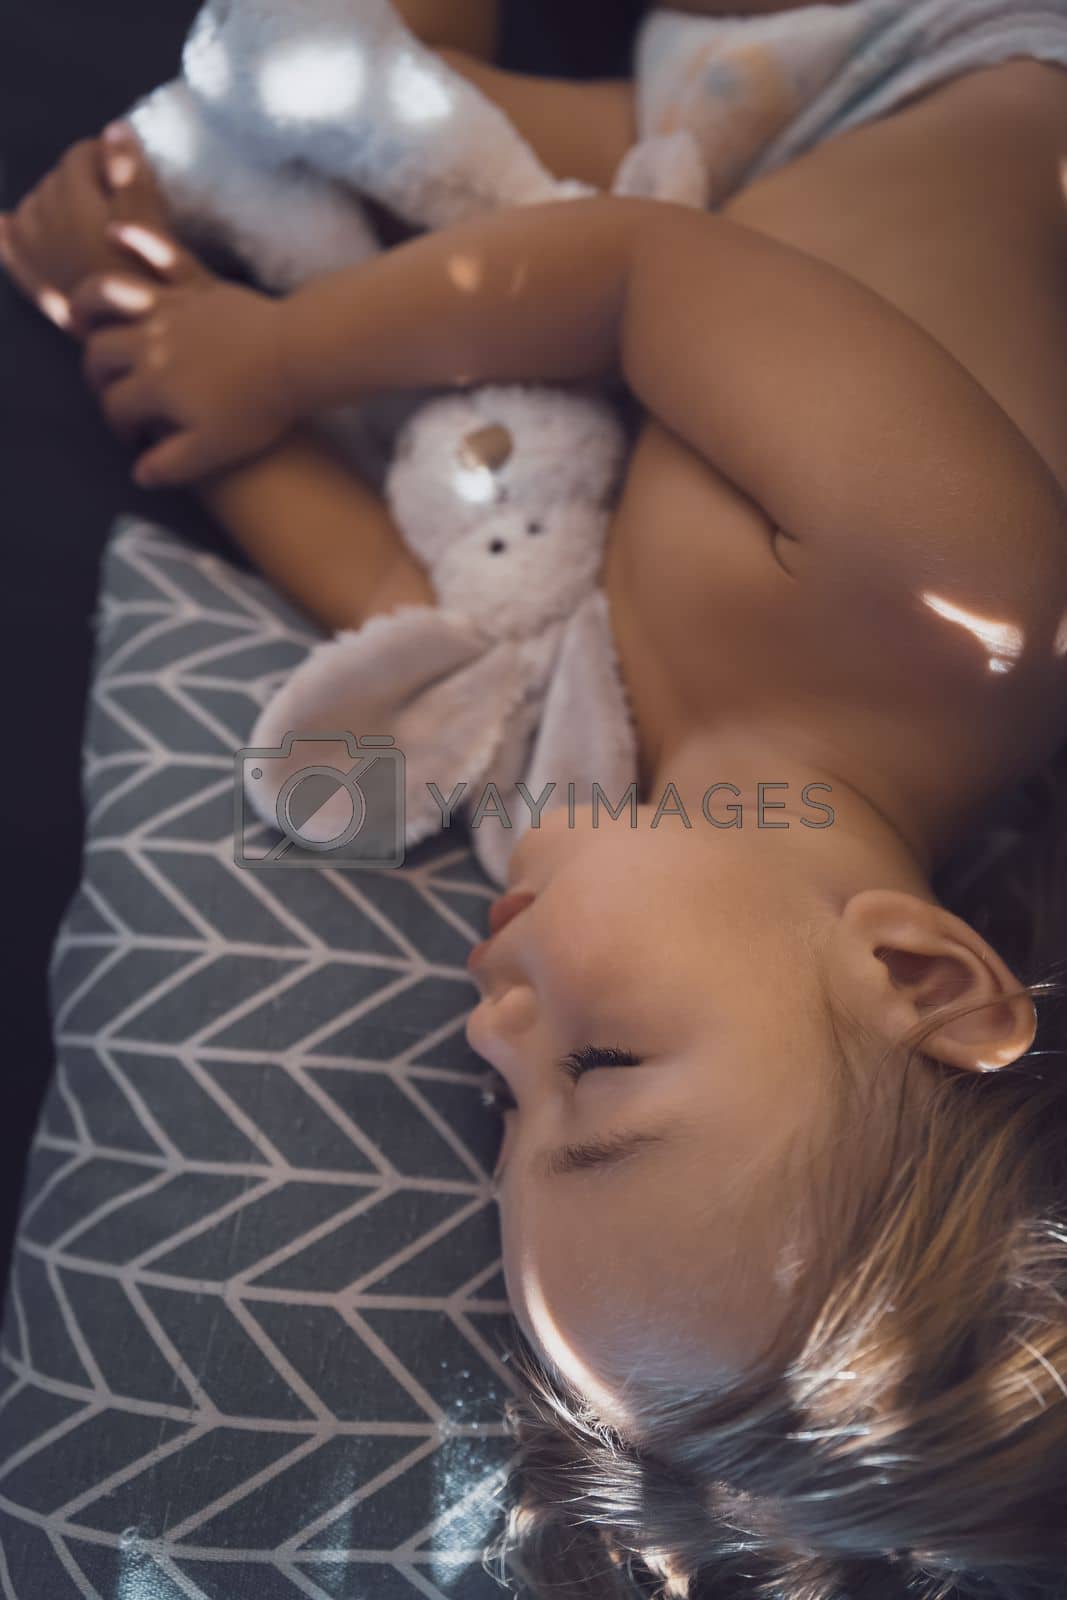 Royalty free image of Beautiful baby sleeping at home by Anna_Omelchenko